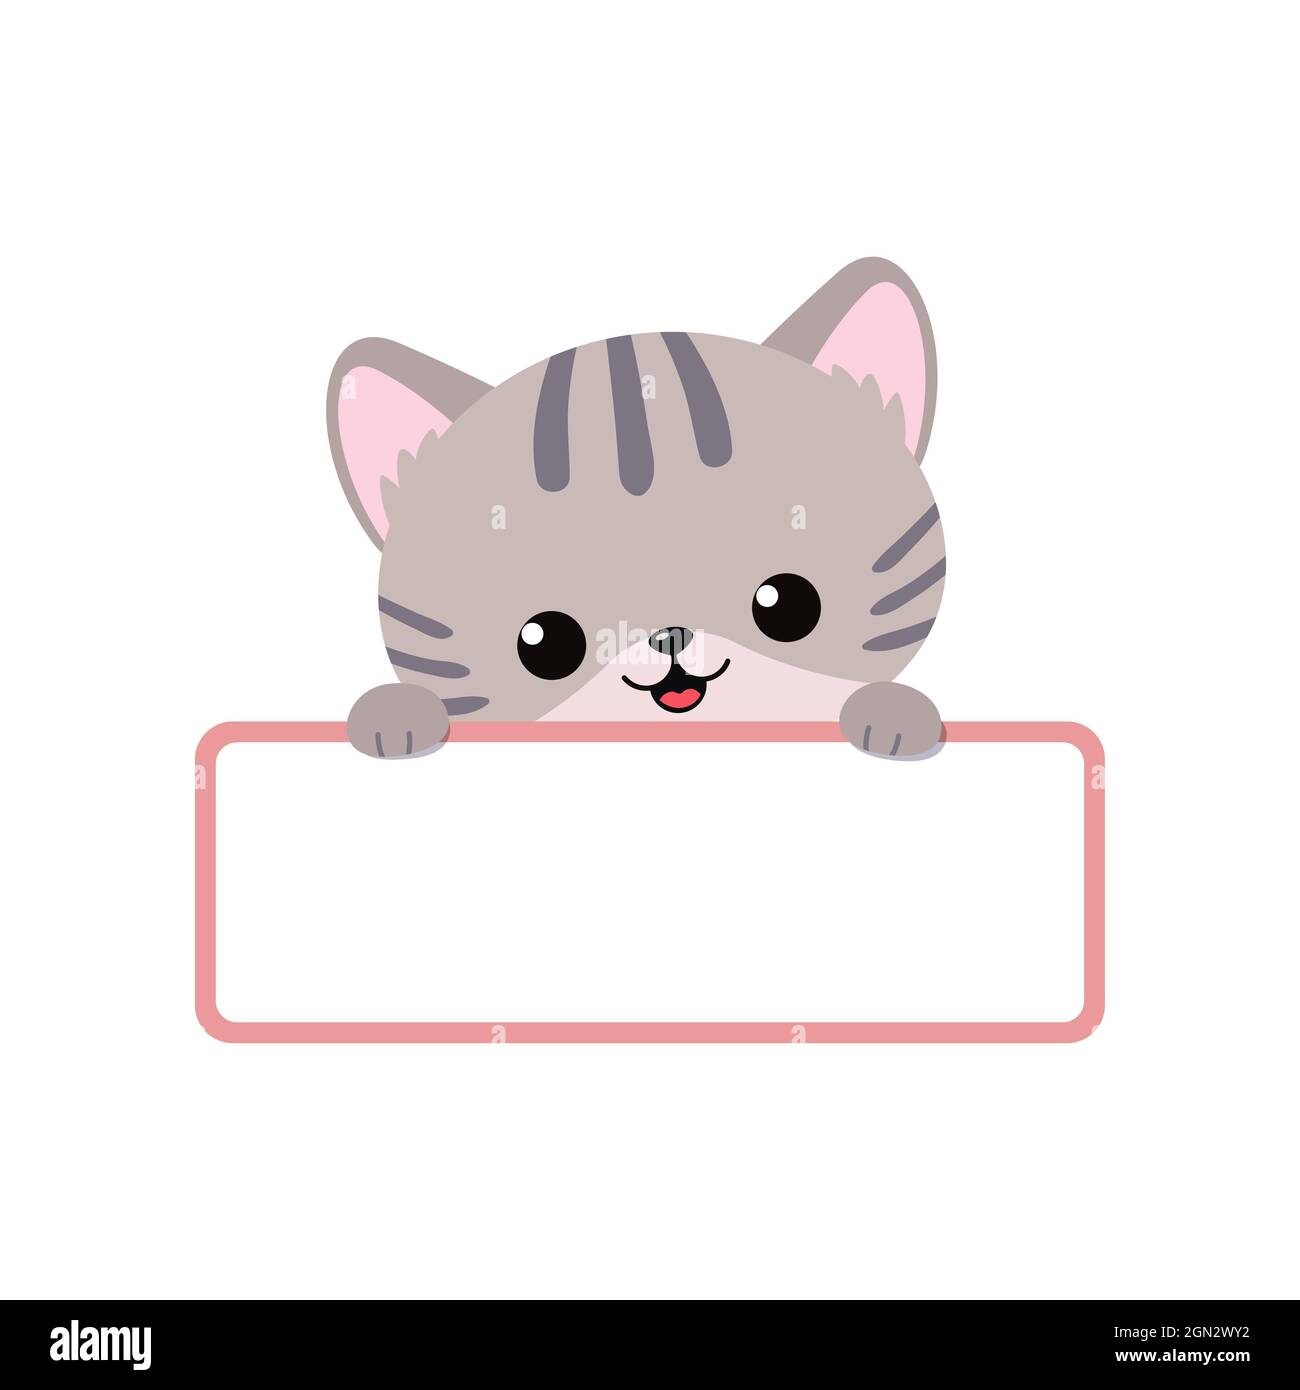 Set of kawaii member icon. Cards with cute cartoon cats. Baby